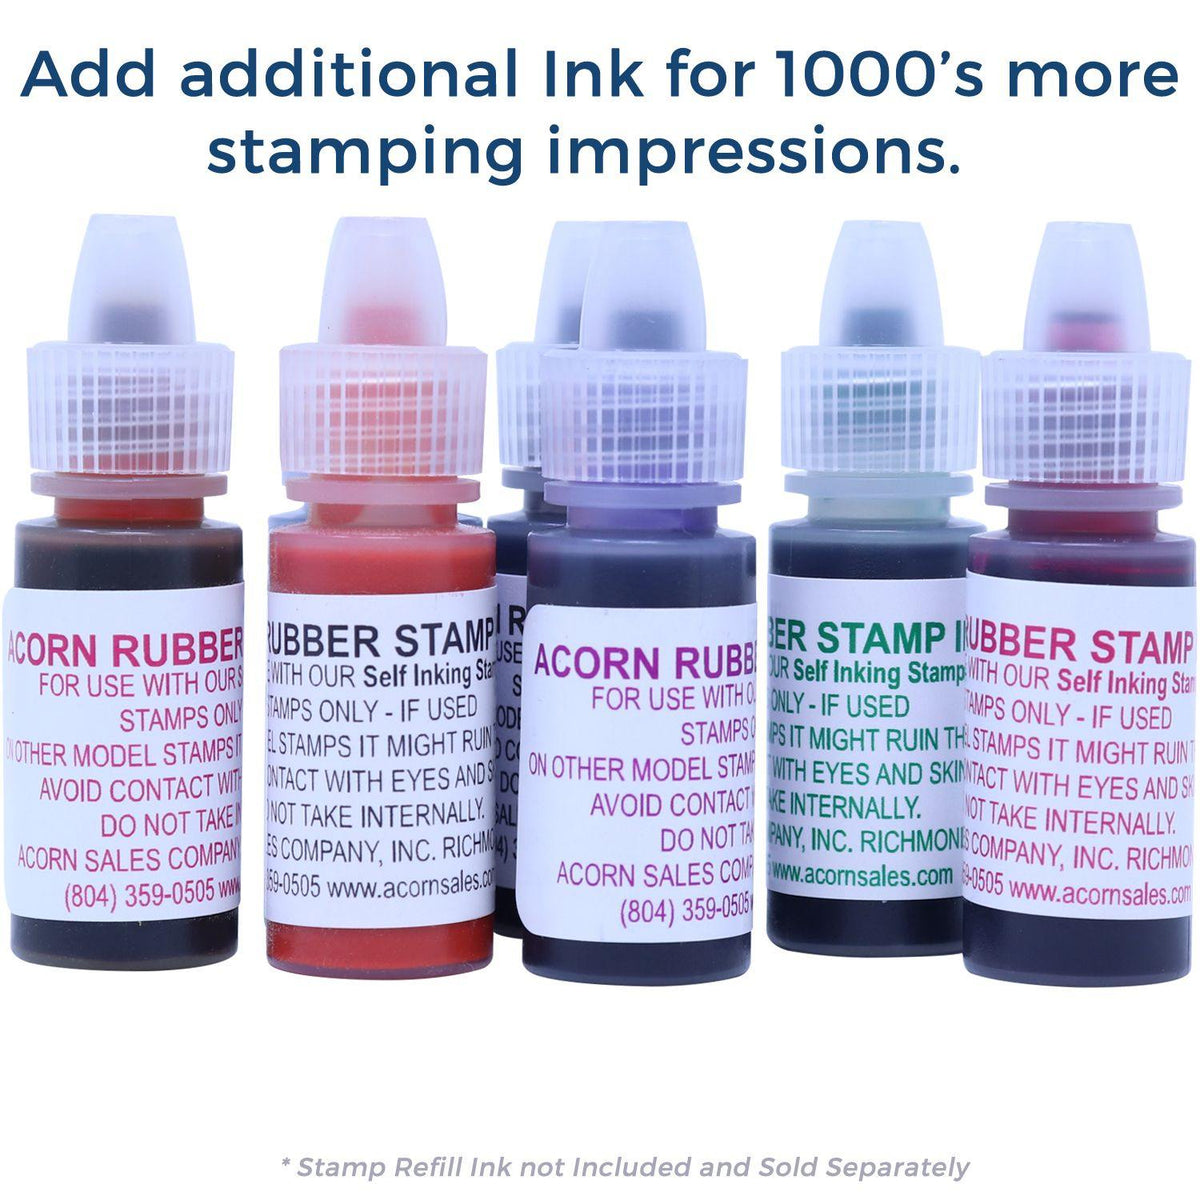 Refill Inks for Slim Pre Inked Debtor Exhibit Stamp Available